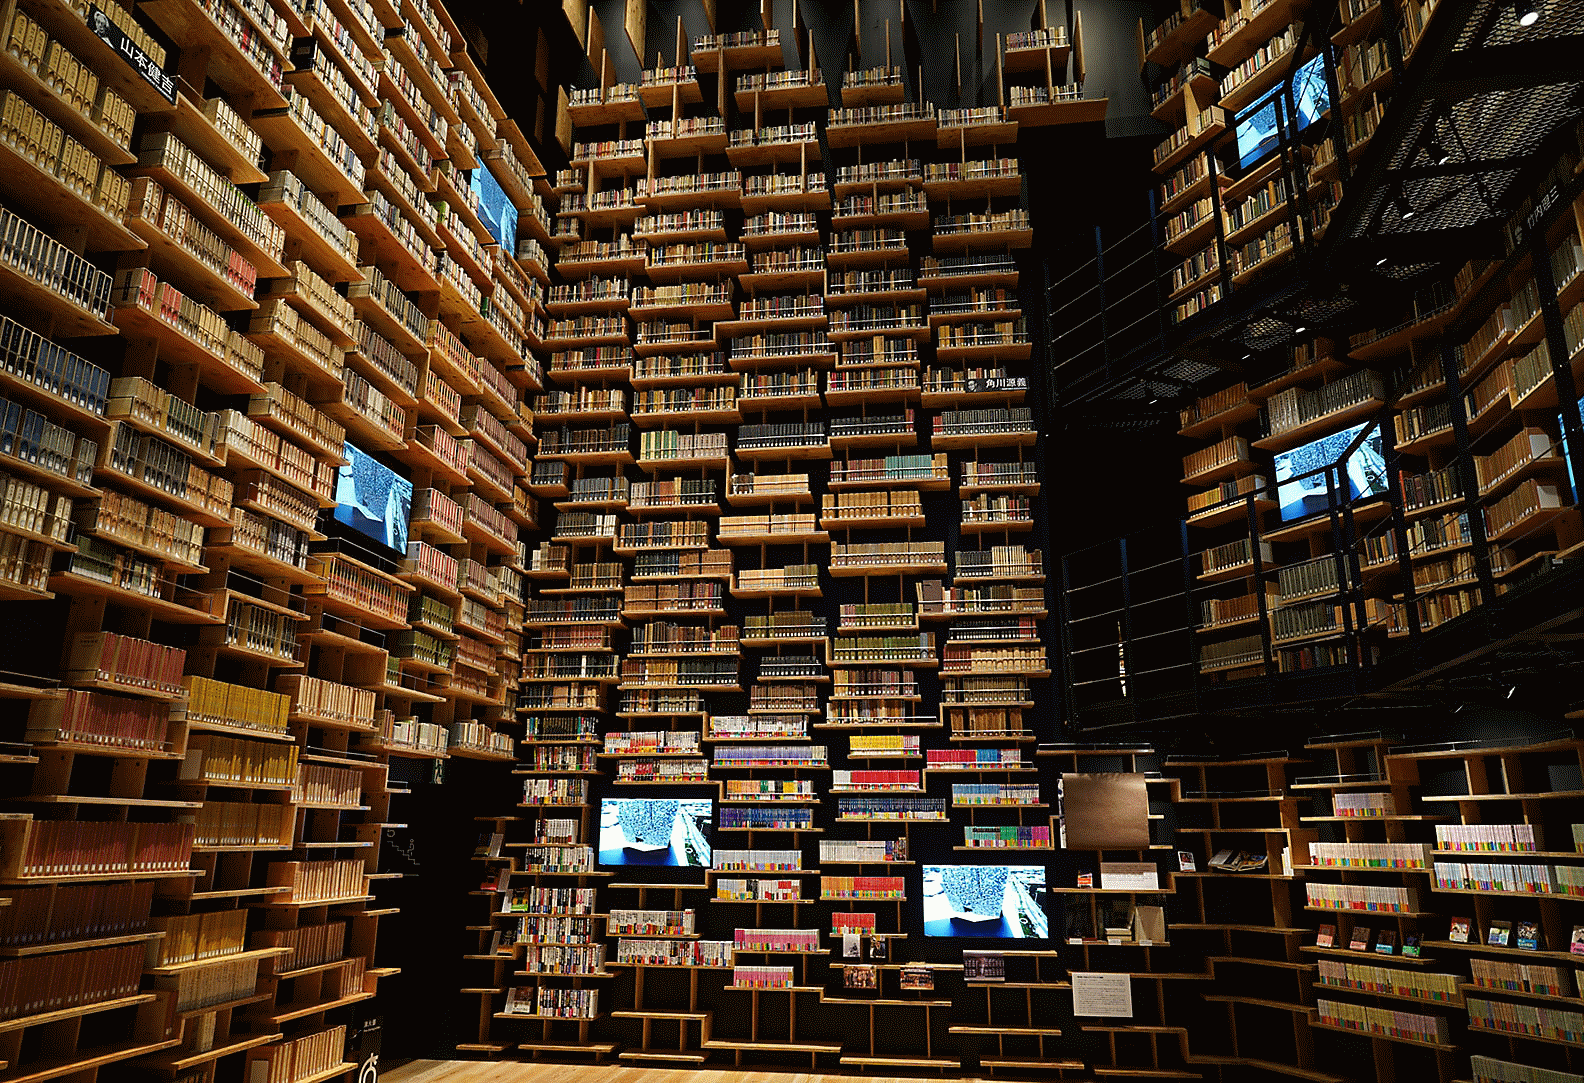 Image of inside of library taken with this lens at high resolution in every corner